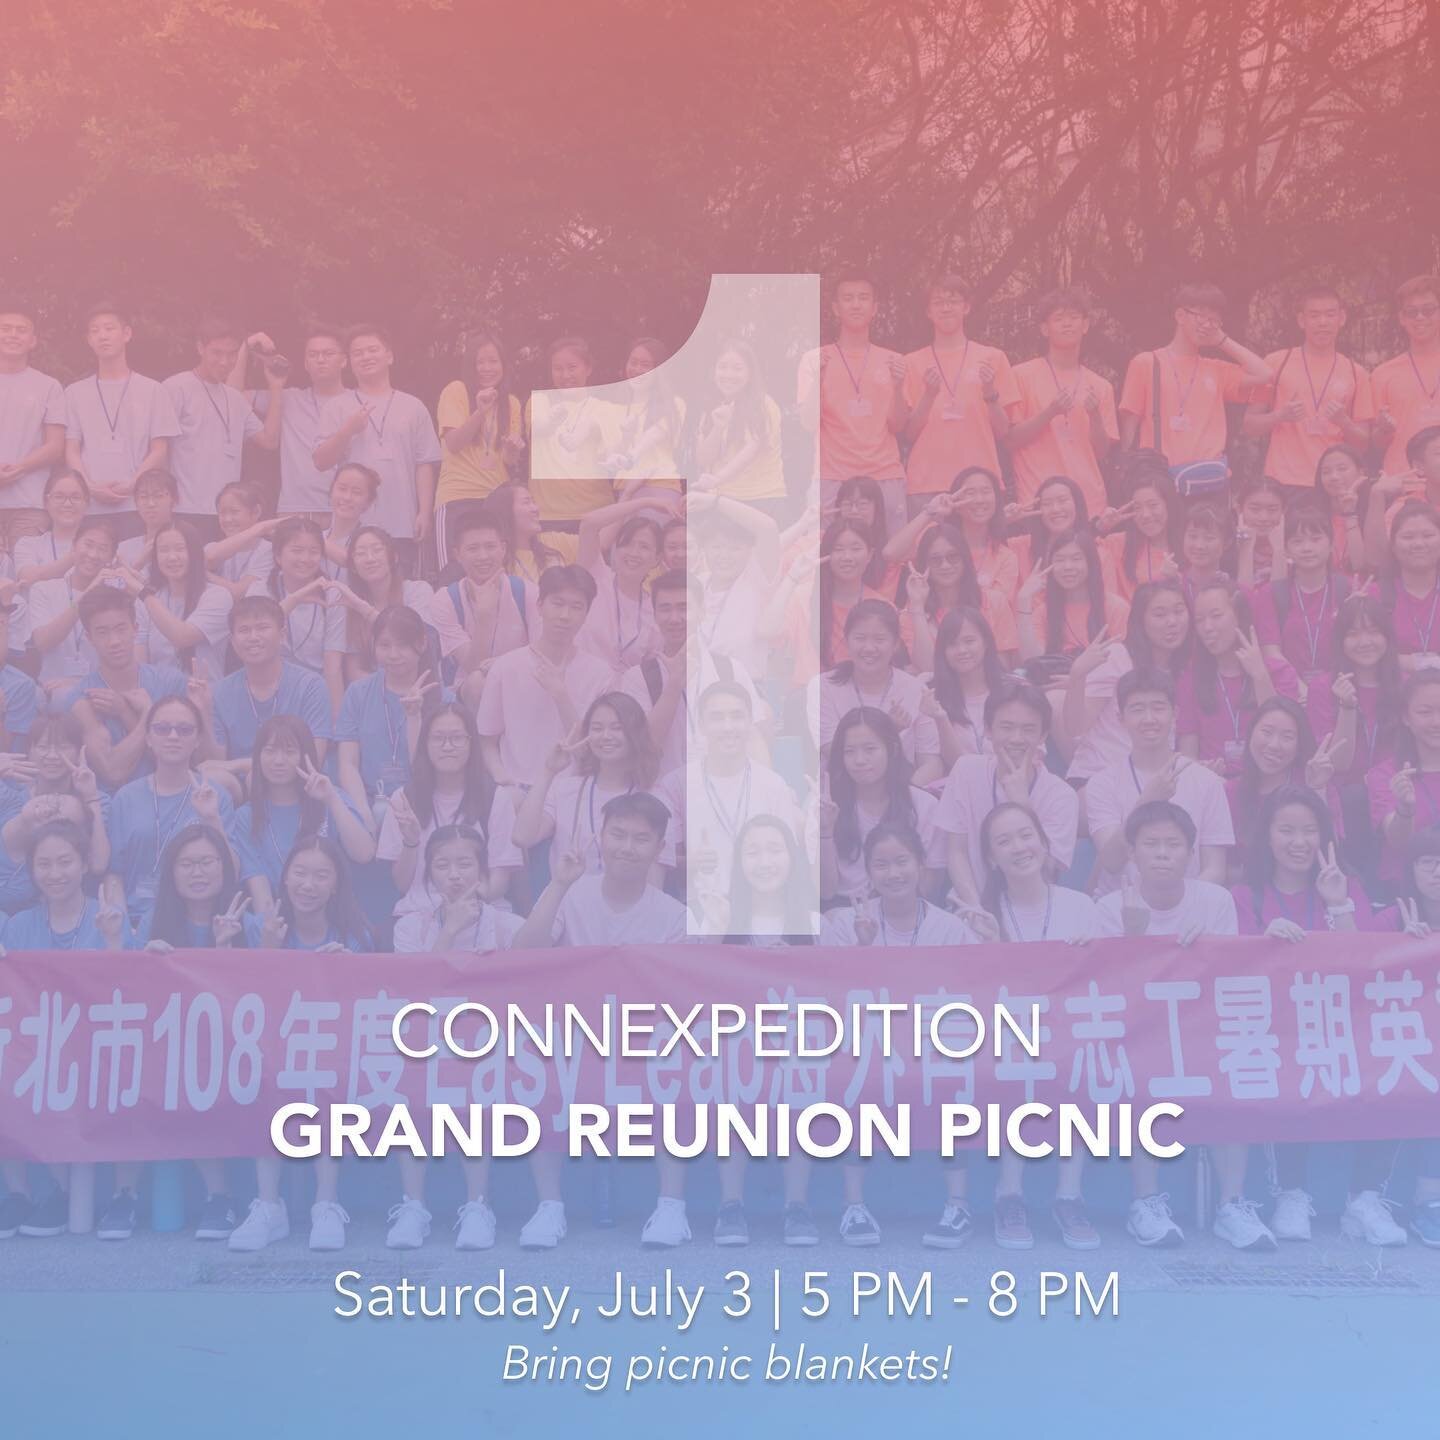 Tomorrow&rsquo;s the big day! Remember to bring your own picnic blankets, wear sunscreen, and bring any outdoor friendly activities if you&rsquo;d like!⛱

RSVPs are closed, but you are definitely very welcome to join us if you&rsquo;re available! The